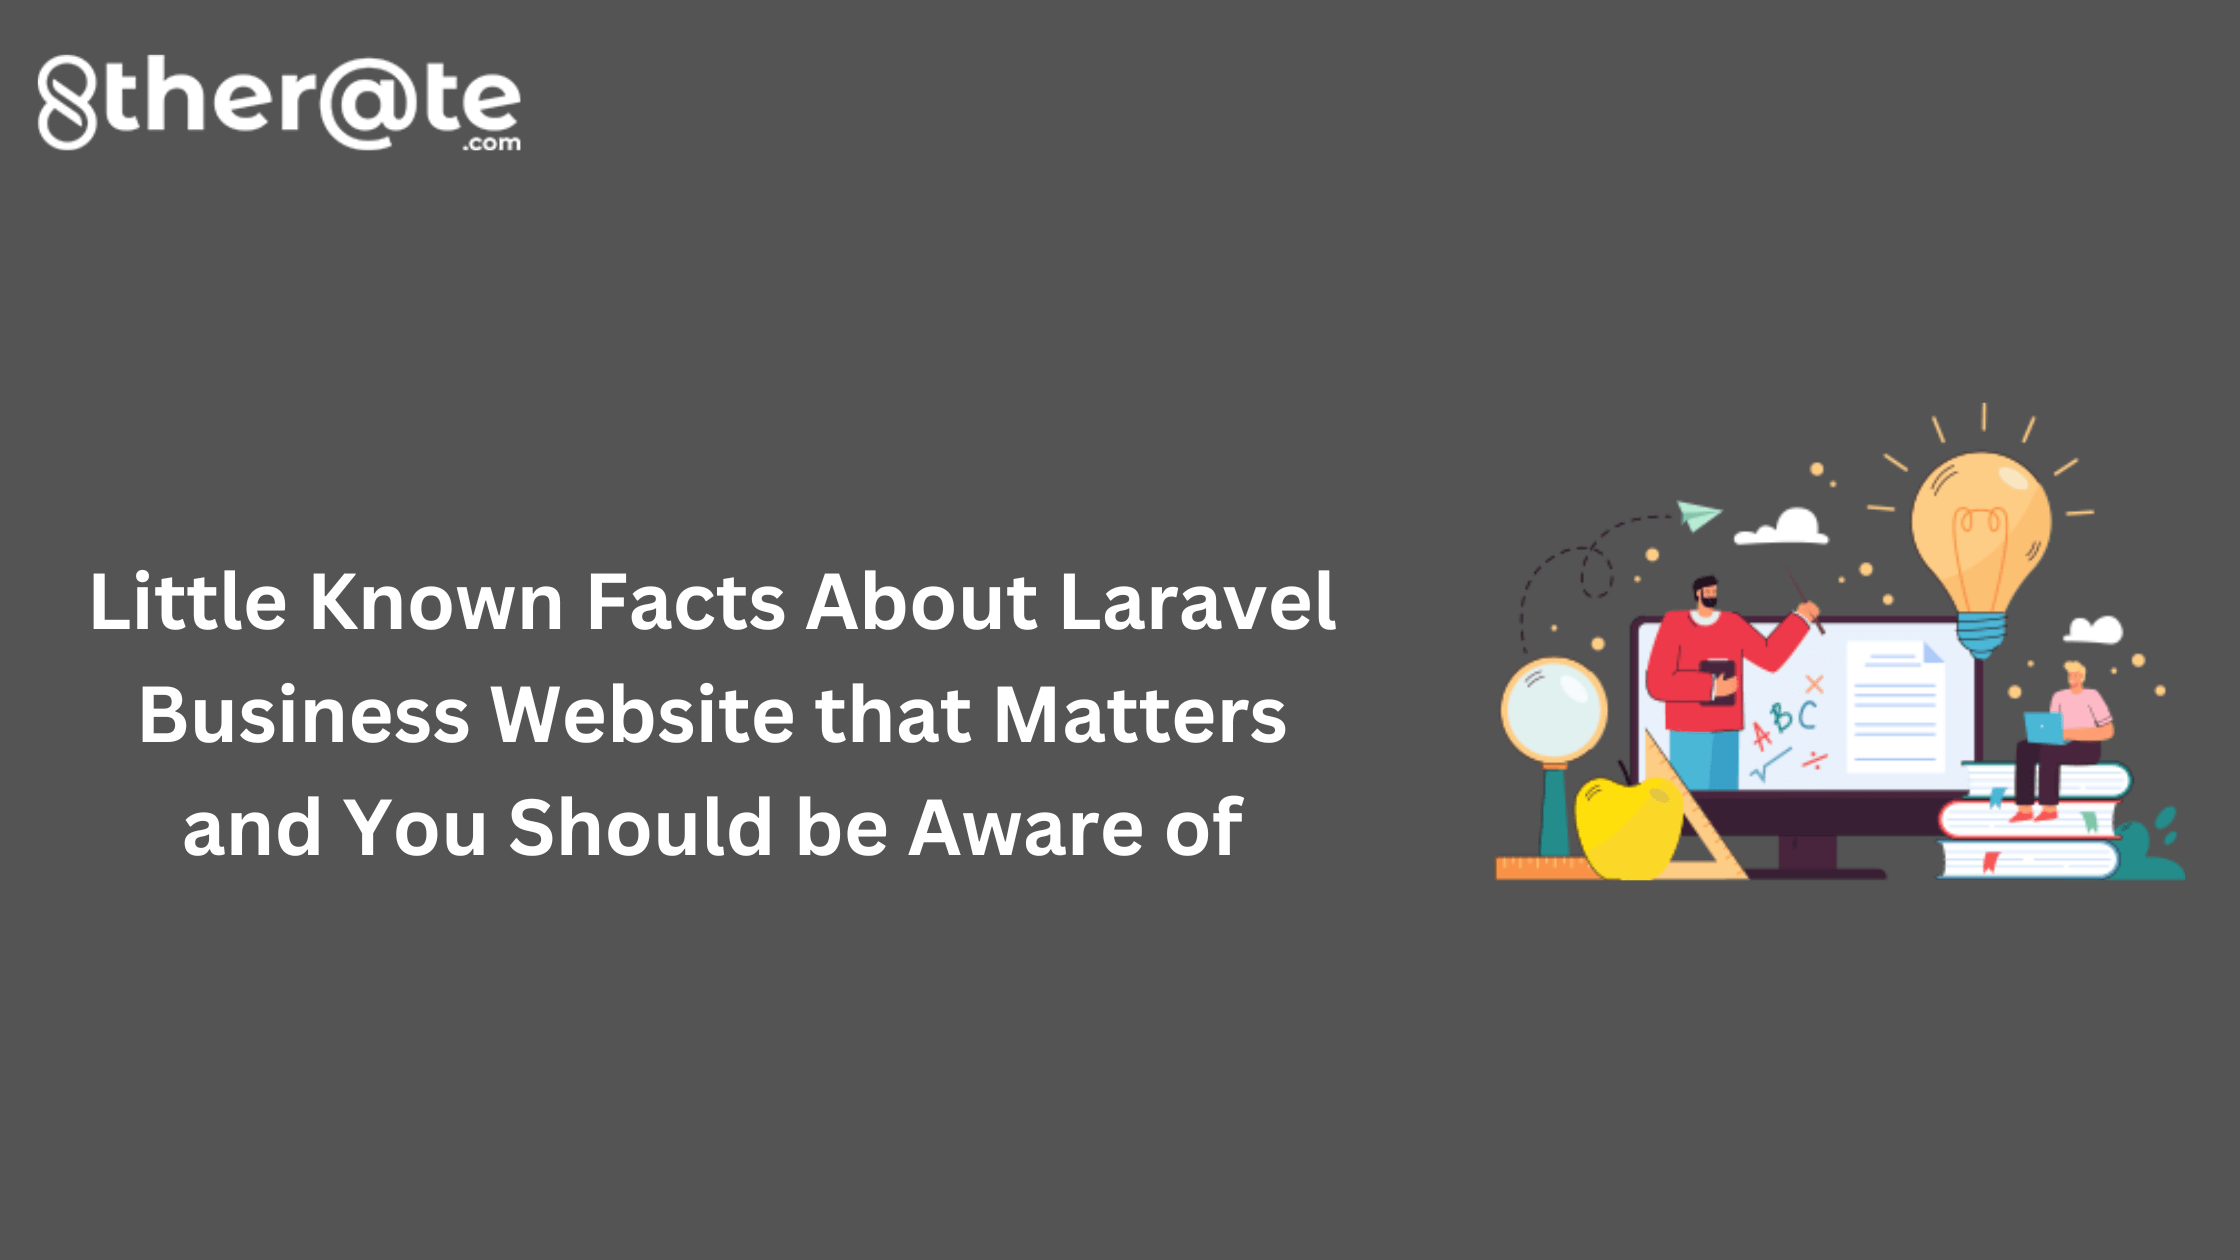 Little Known Facts About Laravel Business Website That Matters And You Should Be Aware Of (1)